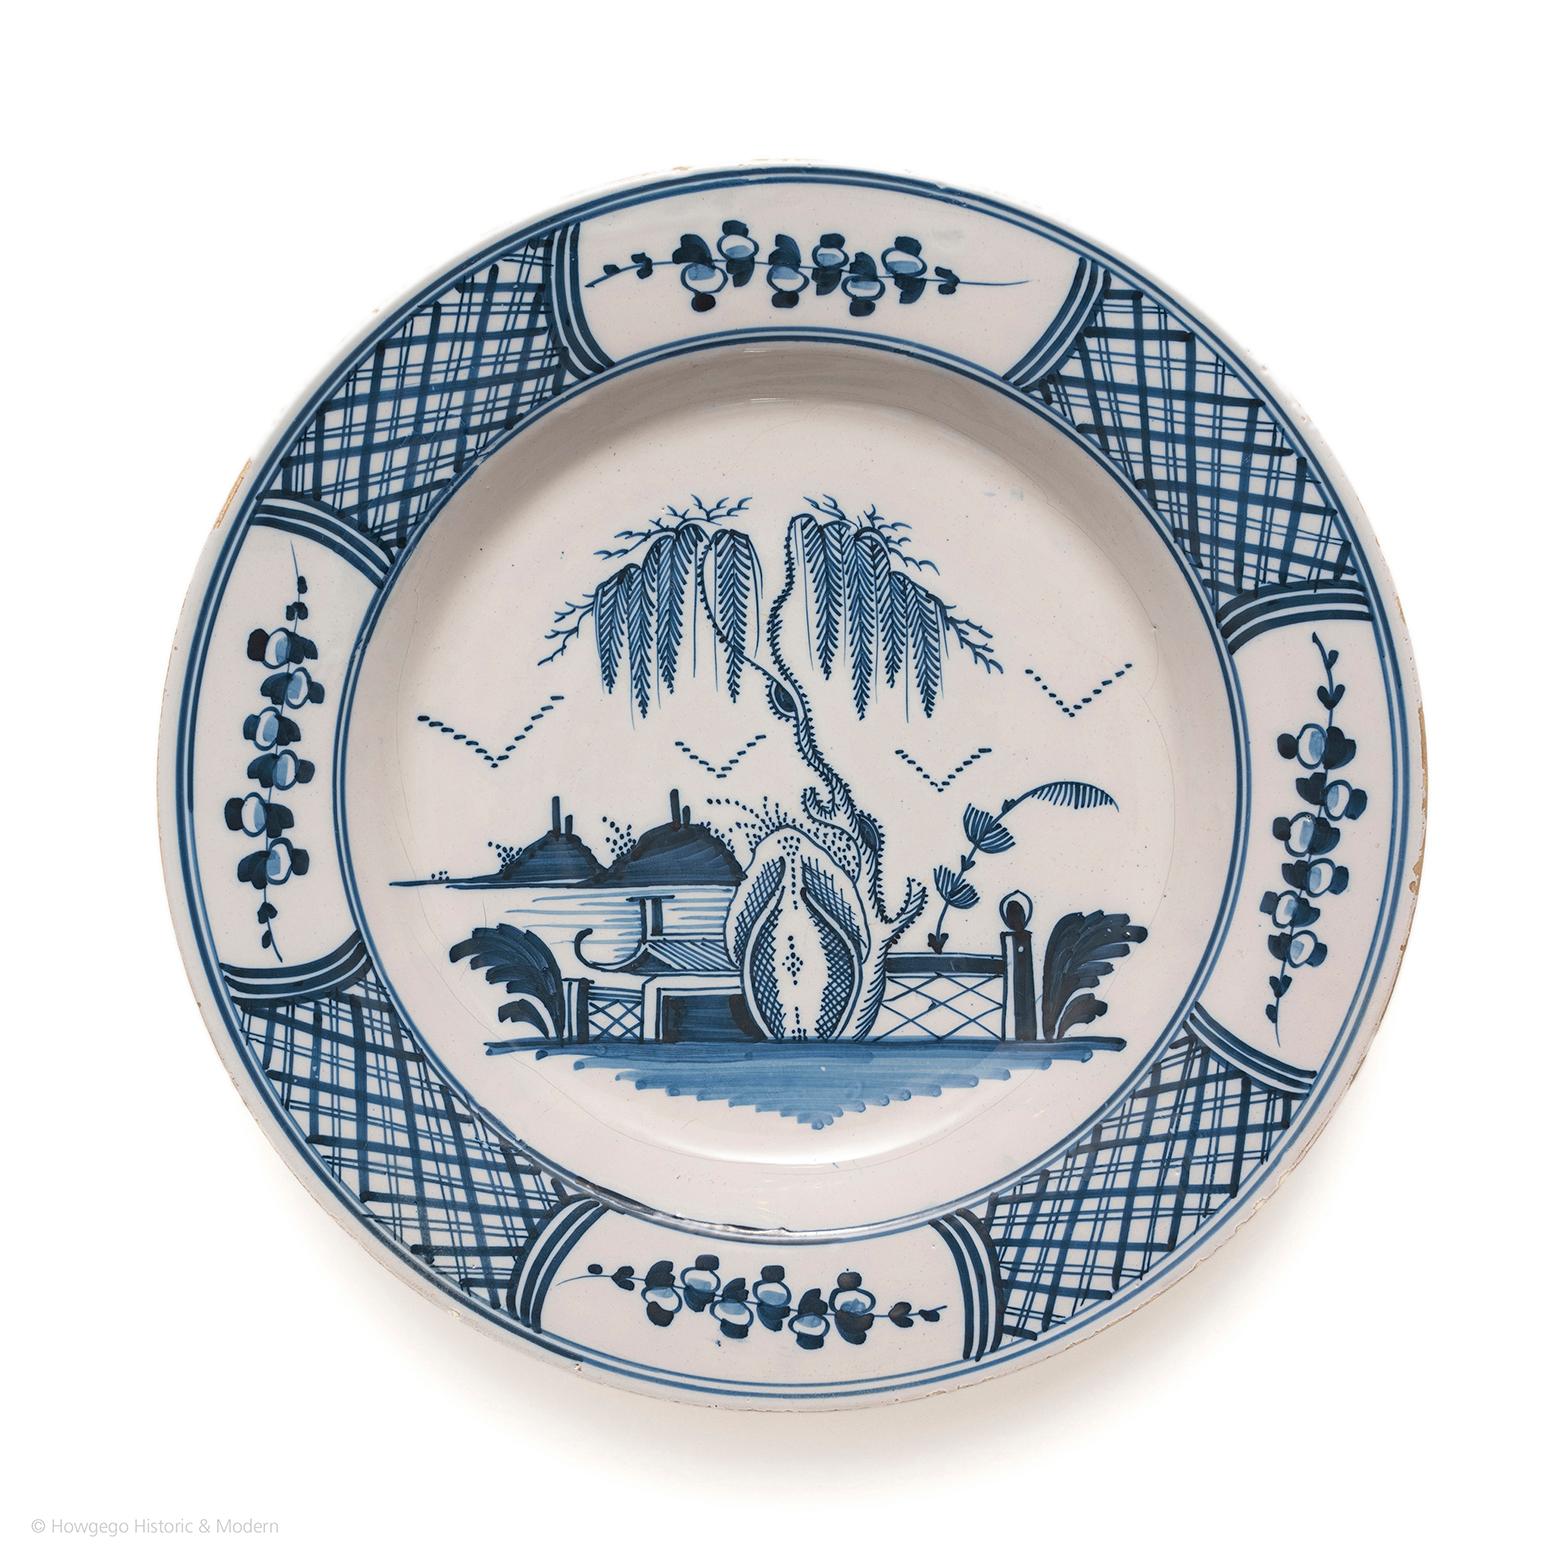 Delightful, charming chinoiserie dish conveying the European interpretation of and fascination with exotic Chinese plants and landscape. 

Decorated with a large willow tree and stylised rockwork outside a fenced garden with hills in the distance